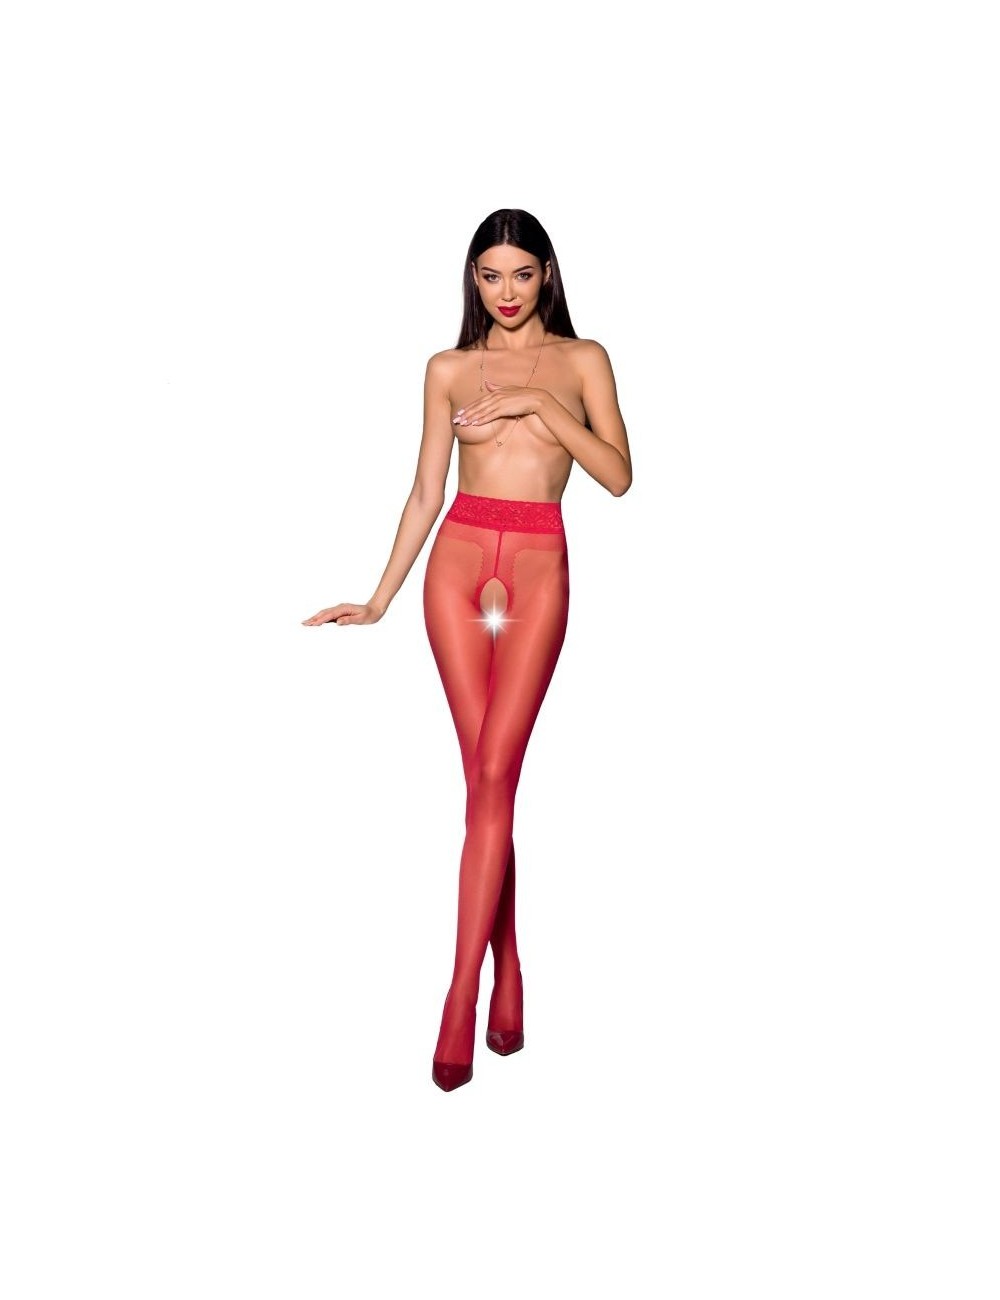 Lingerie - Bas - PASSION WOMAN TIOPEN 001 BAS ROUGE TAILLE 1/2 - PASSION WOMAN GARTER & STOCK